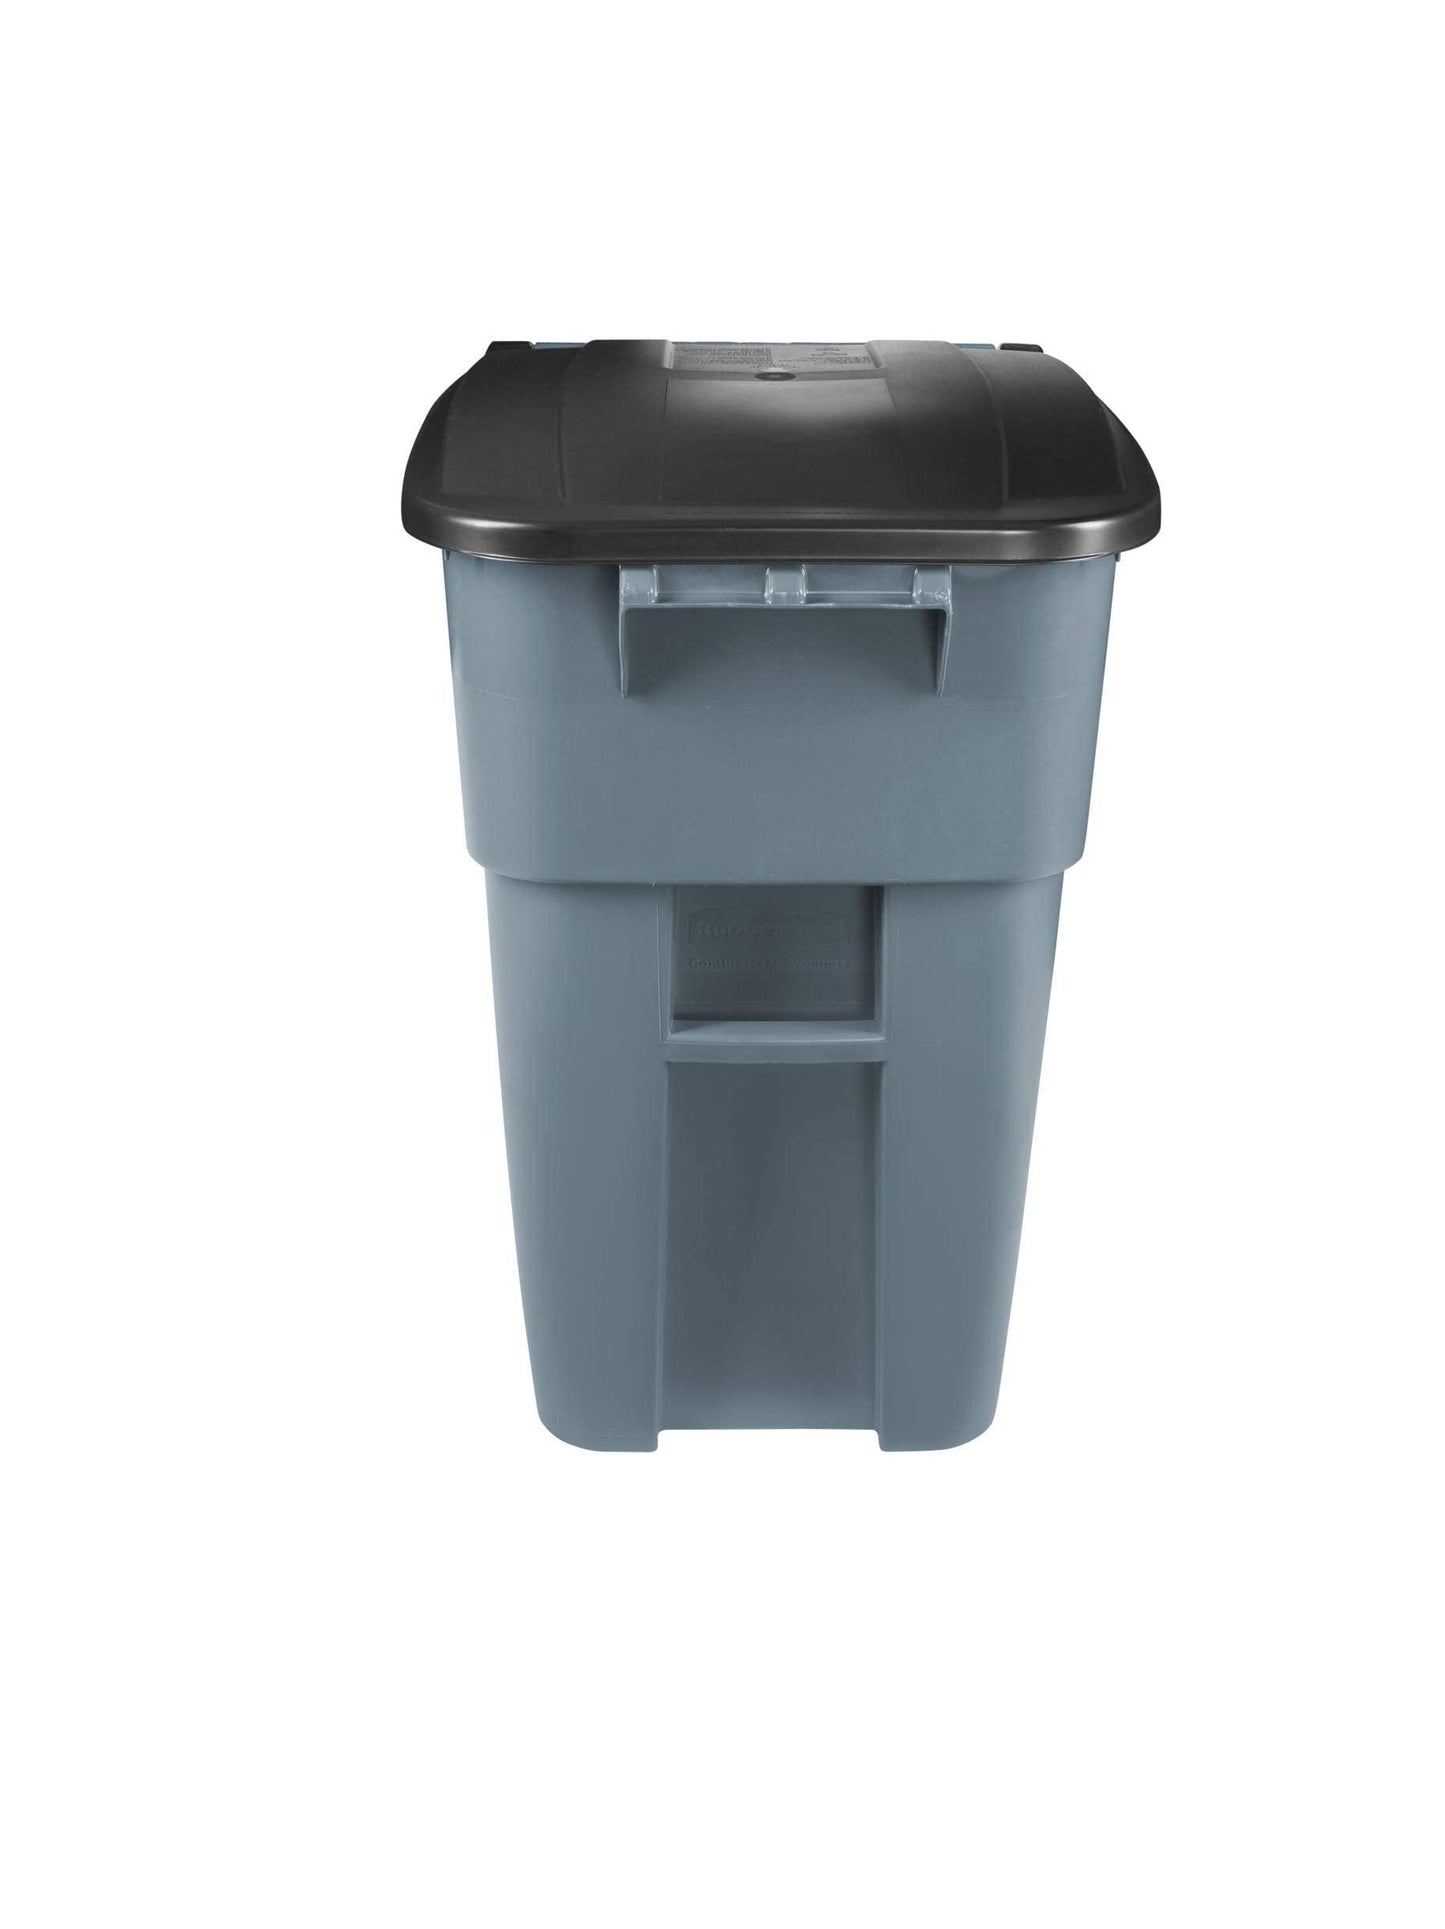 Rubbermaid Commercial Products Brute Rollout Trash/Garbage Can/Bin with Wheels, 50 GAL, for Restaurants/Hospitals/Offices/Back of House/Warehouses/Home, Gray (FG9W2700GRAY) - CookCave